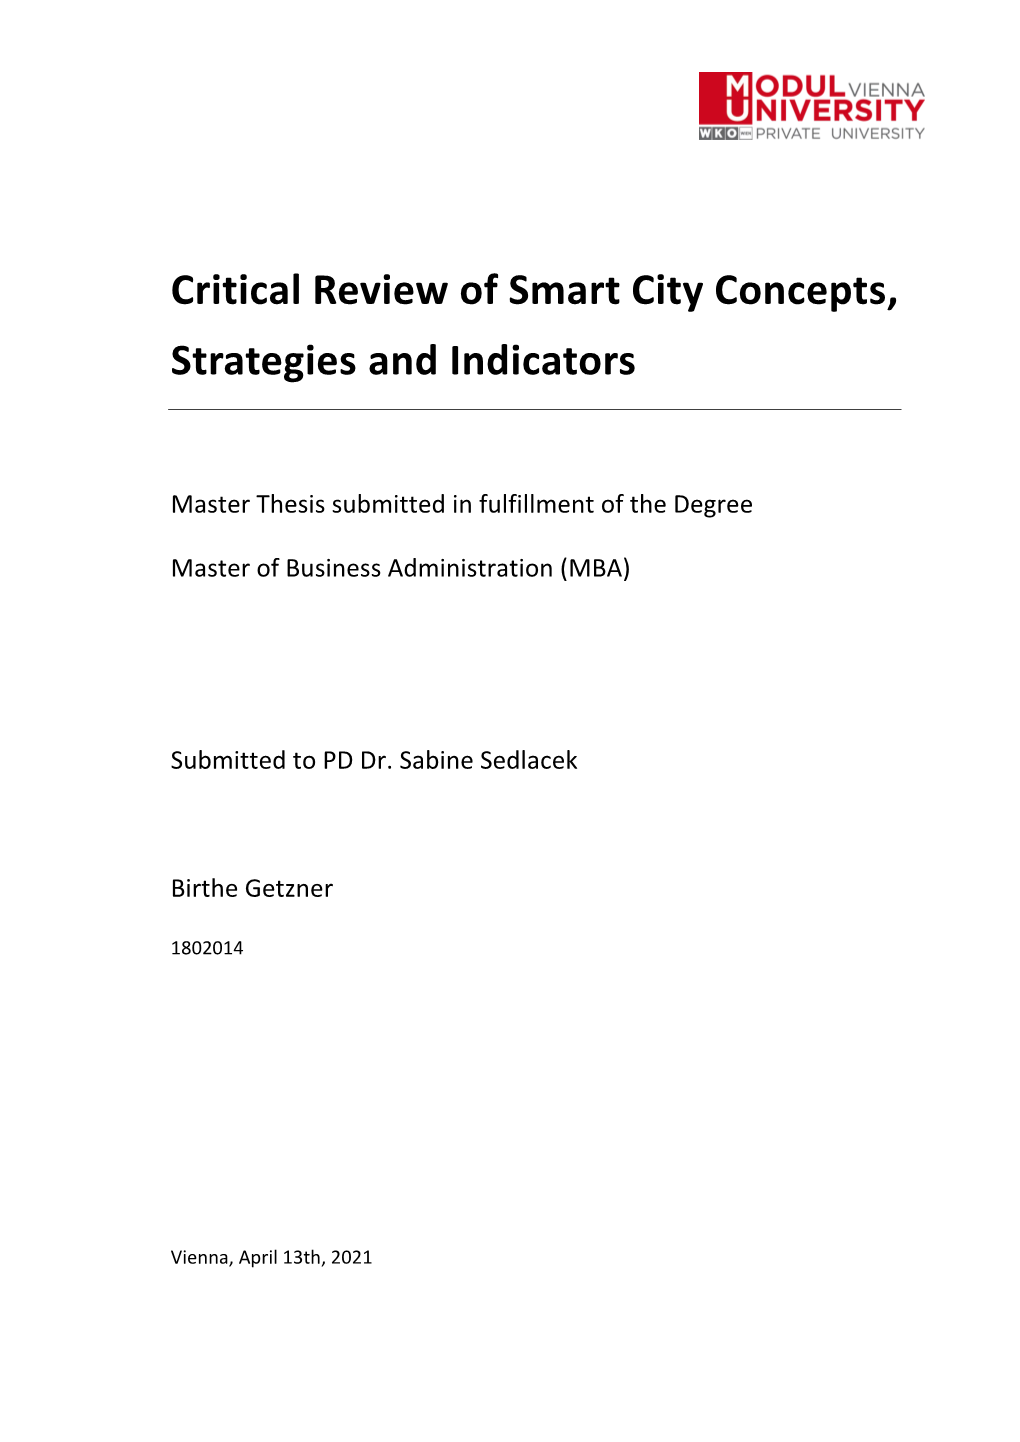 Critical Review of Smart City Concepts, Strategies and Indicators